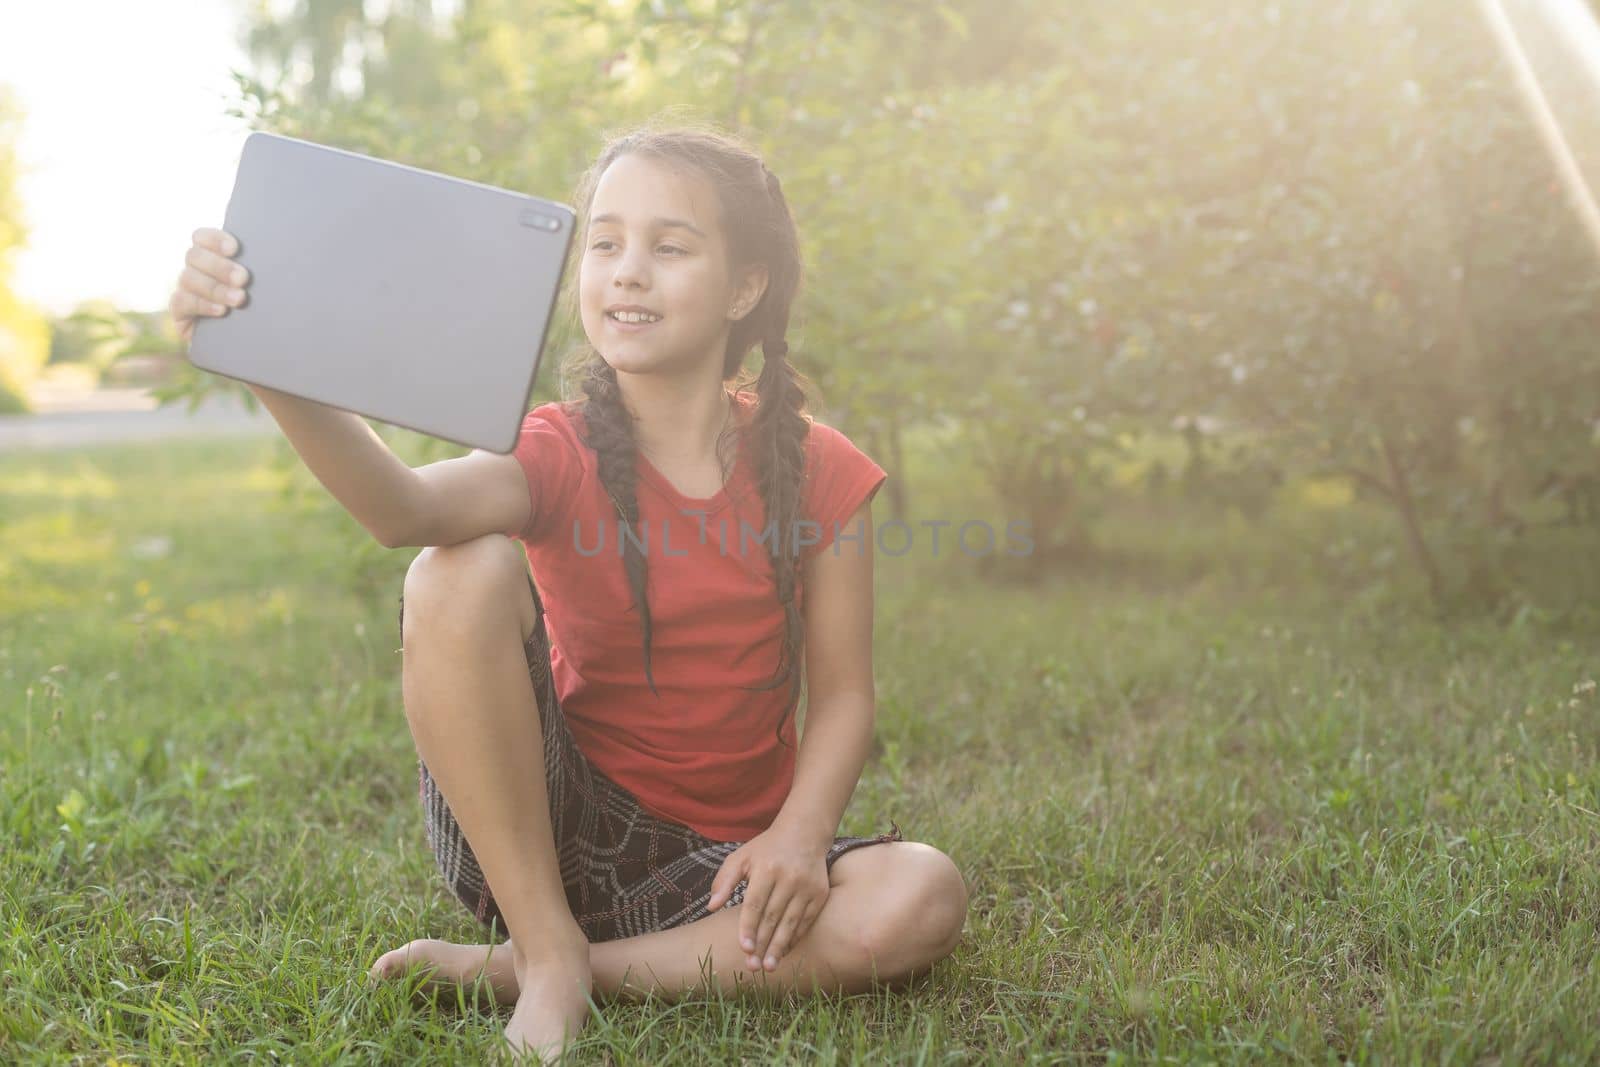 Child girl playing on a Digital tablet in the garden. Online or Remote education concept.